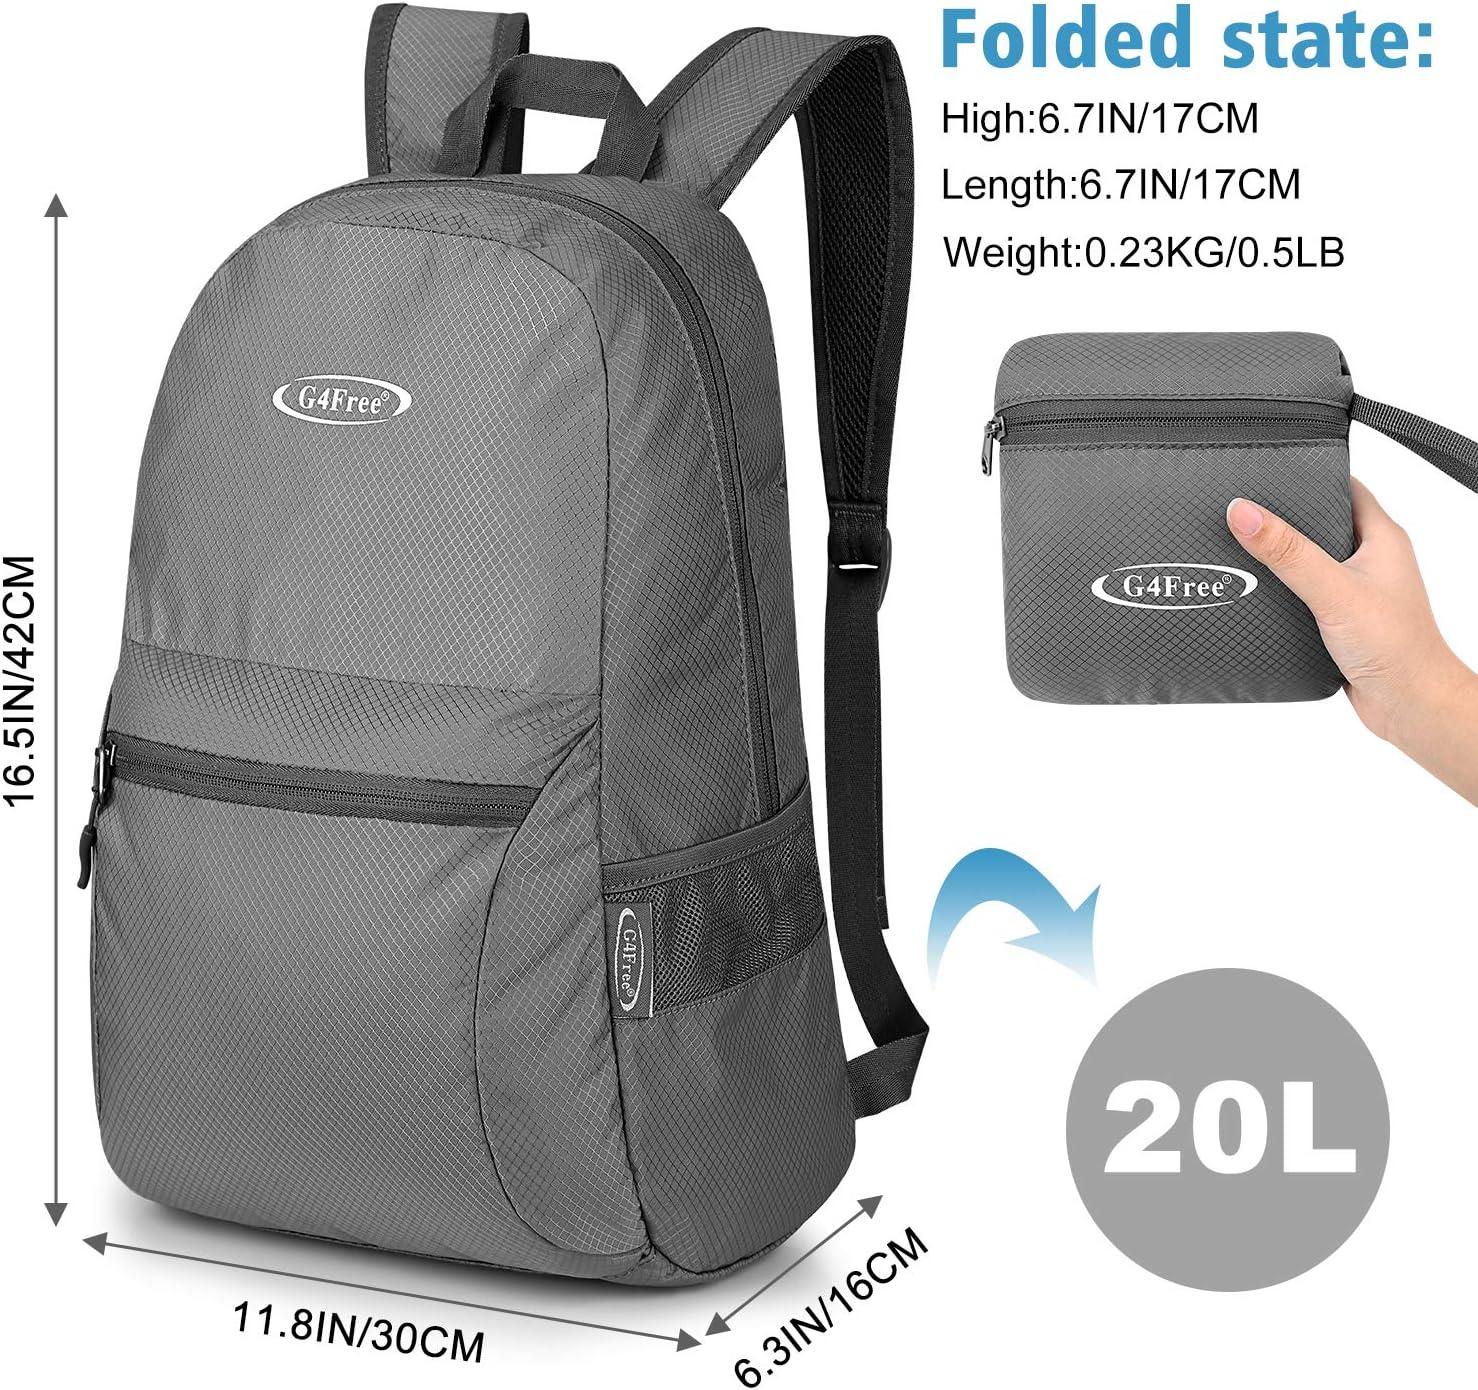 G4Free 20L Lightweight Packable Backpack Travel Hiking Daypack